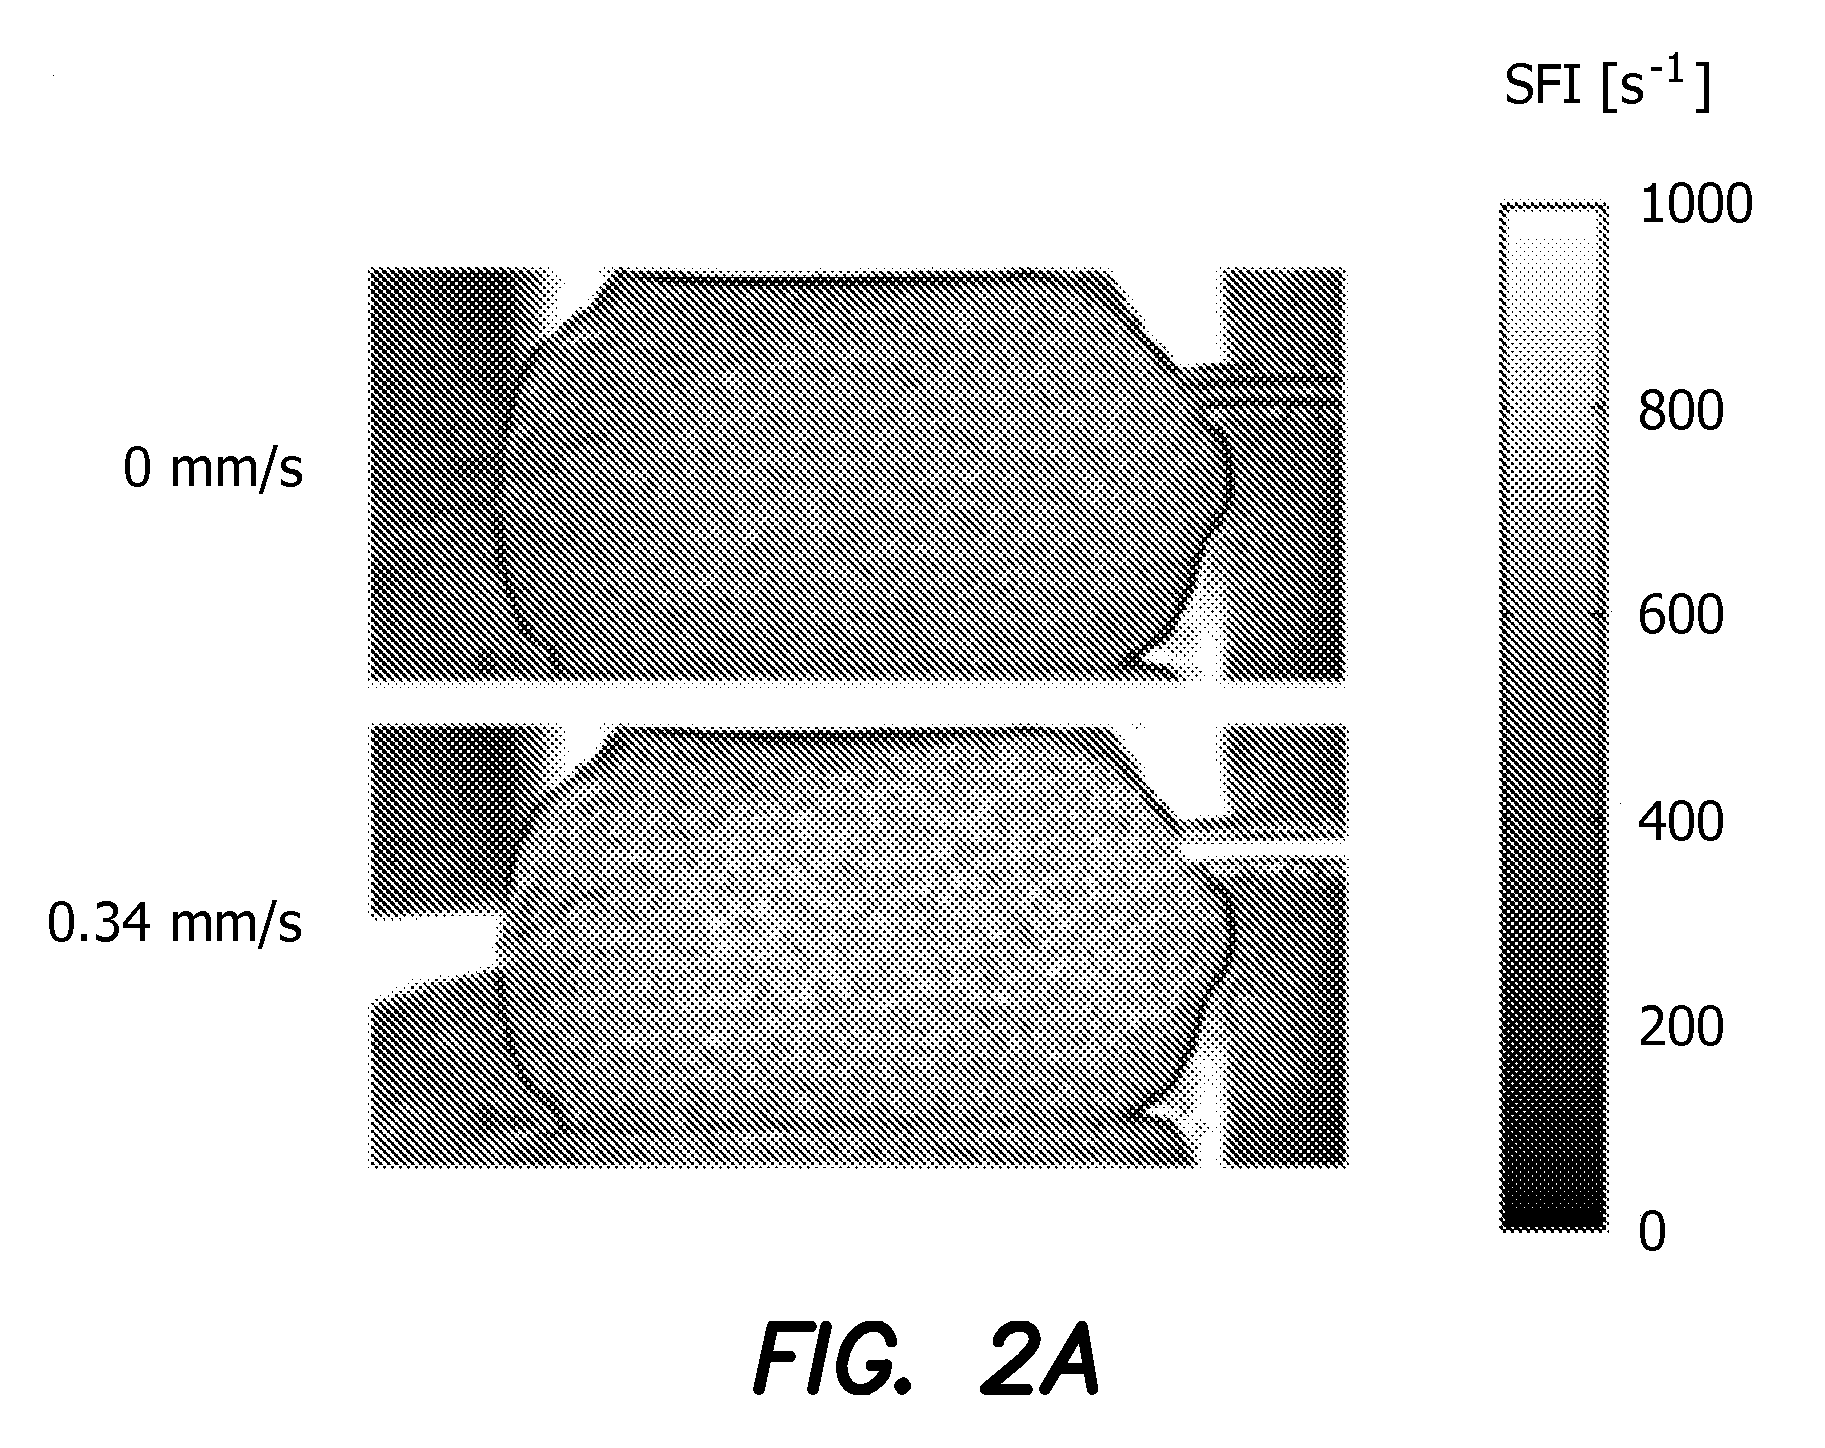 Method and apparatus for the assessment of pulpal vitality using laser speckle imaging